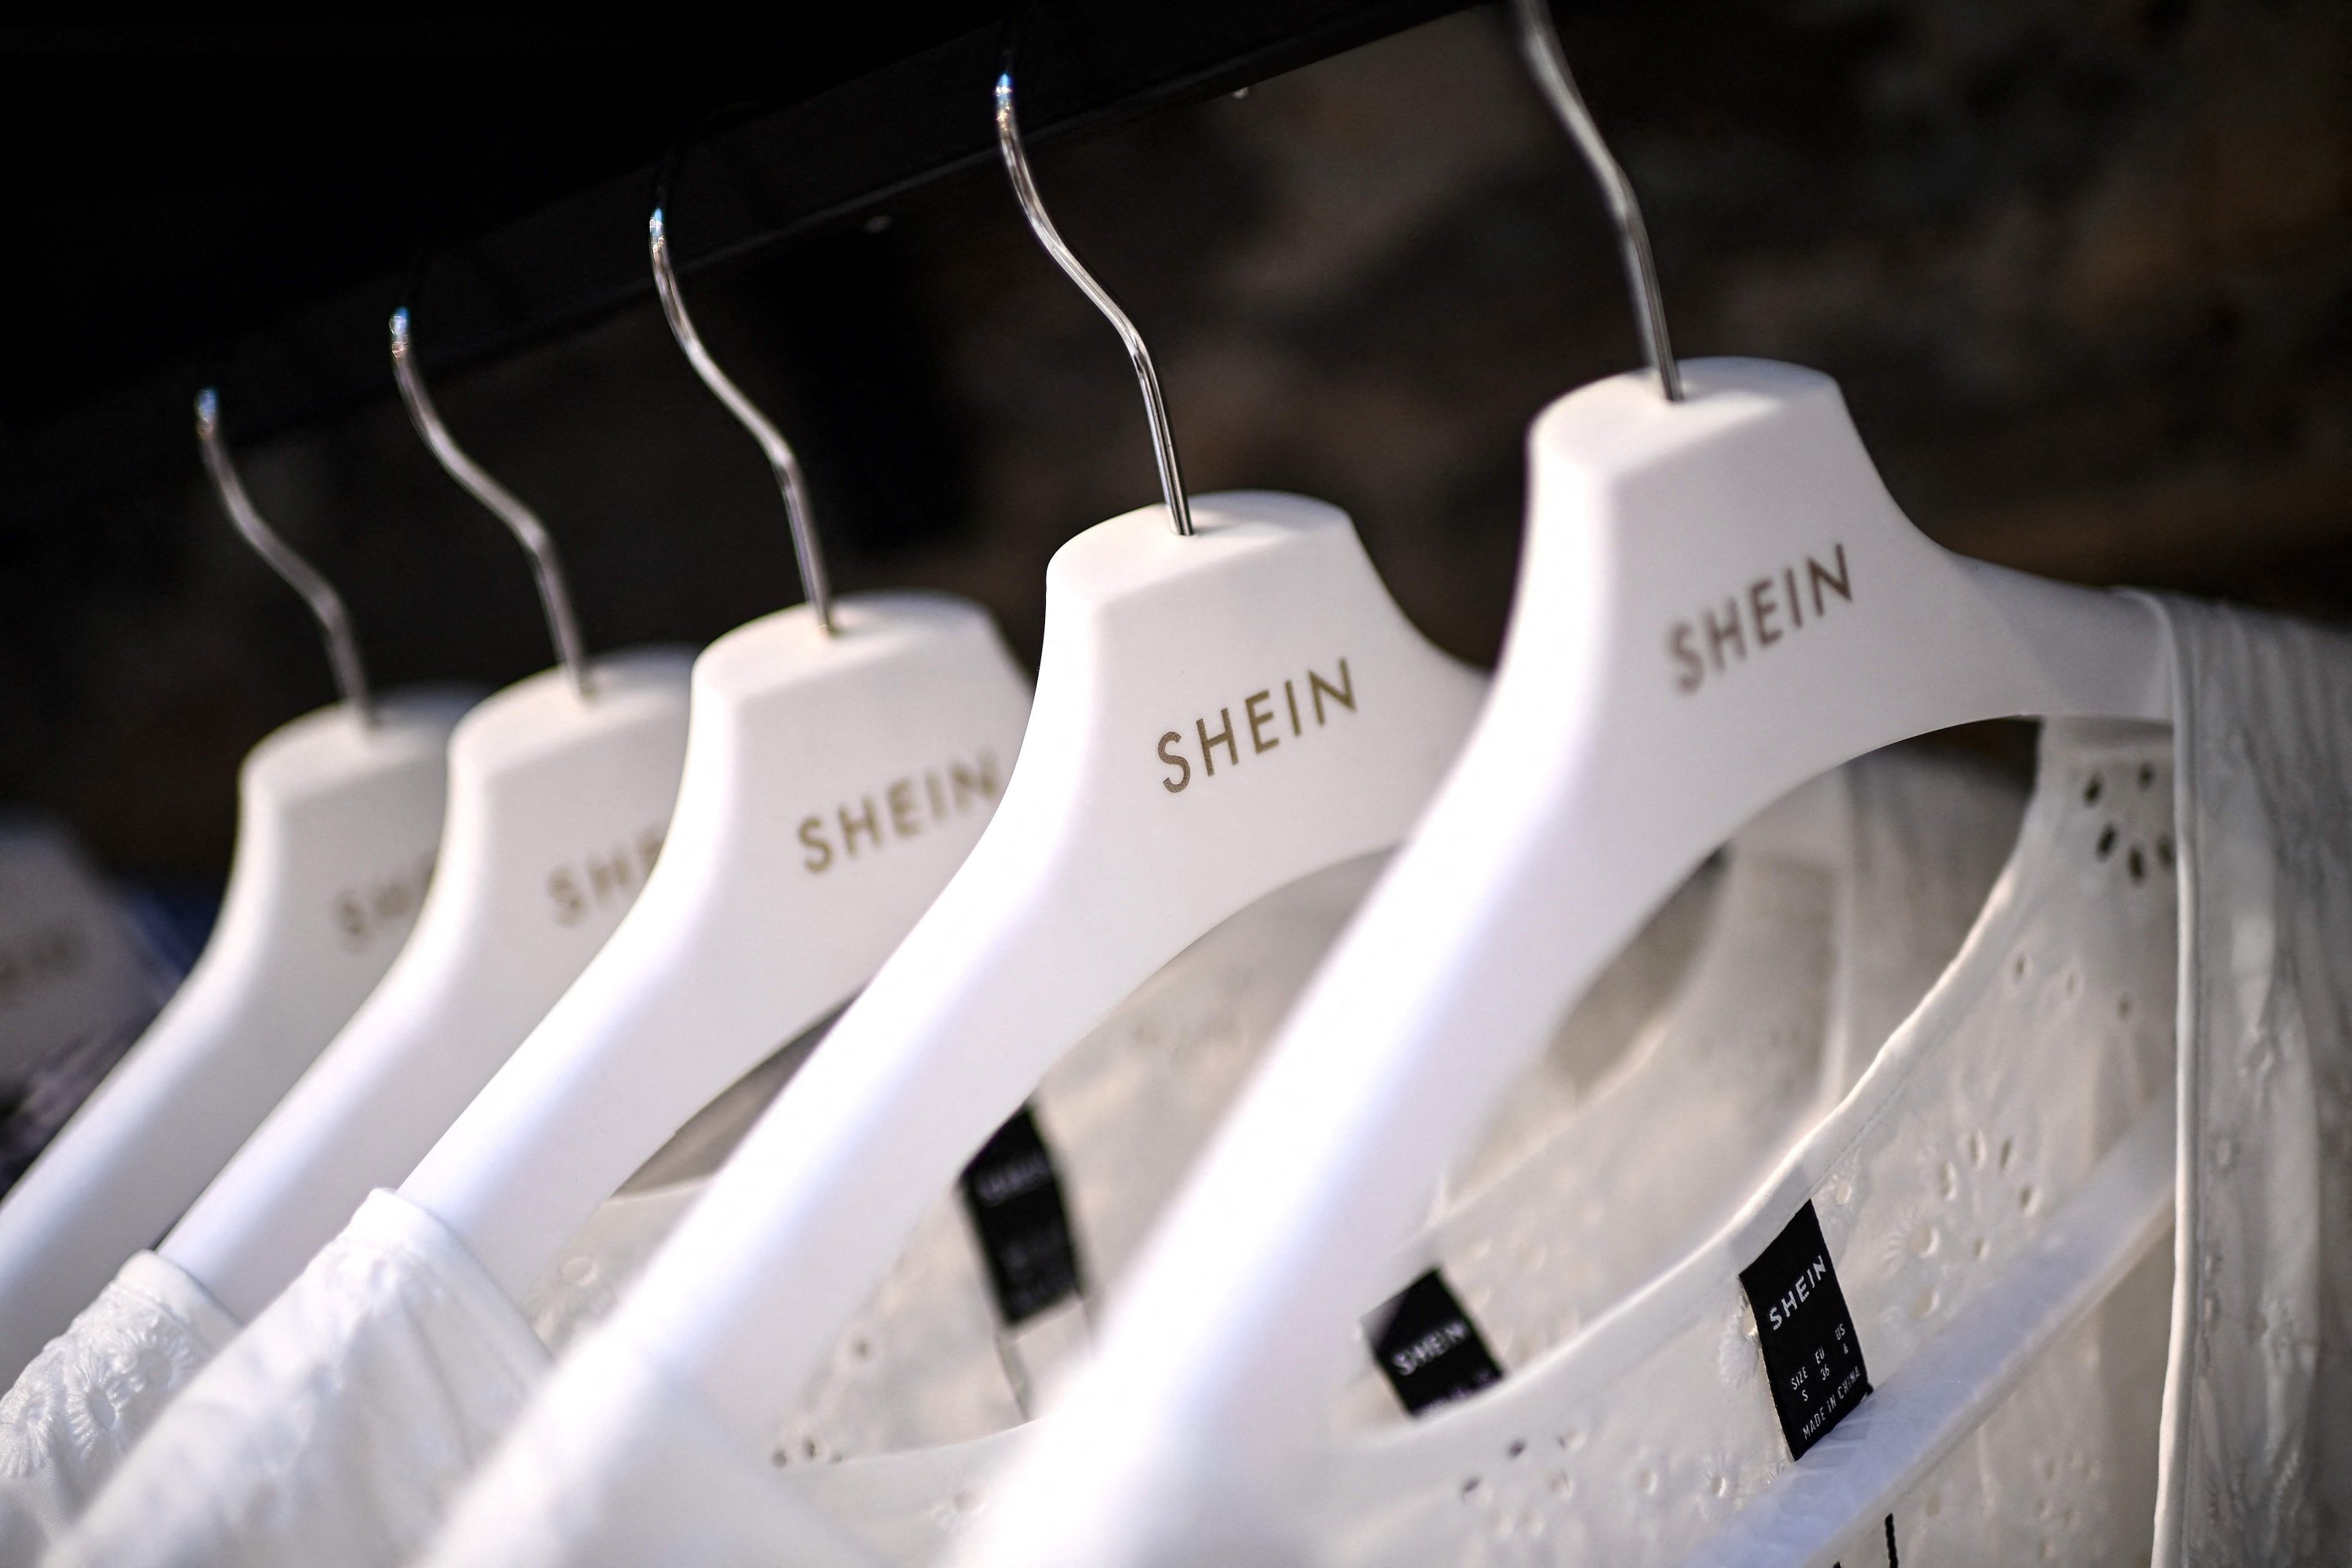 Chinese fashion tycoon Shein denies low prices due to forced labor